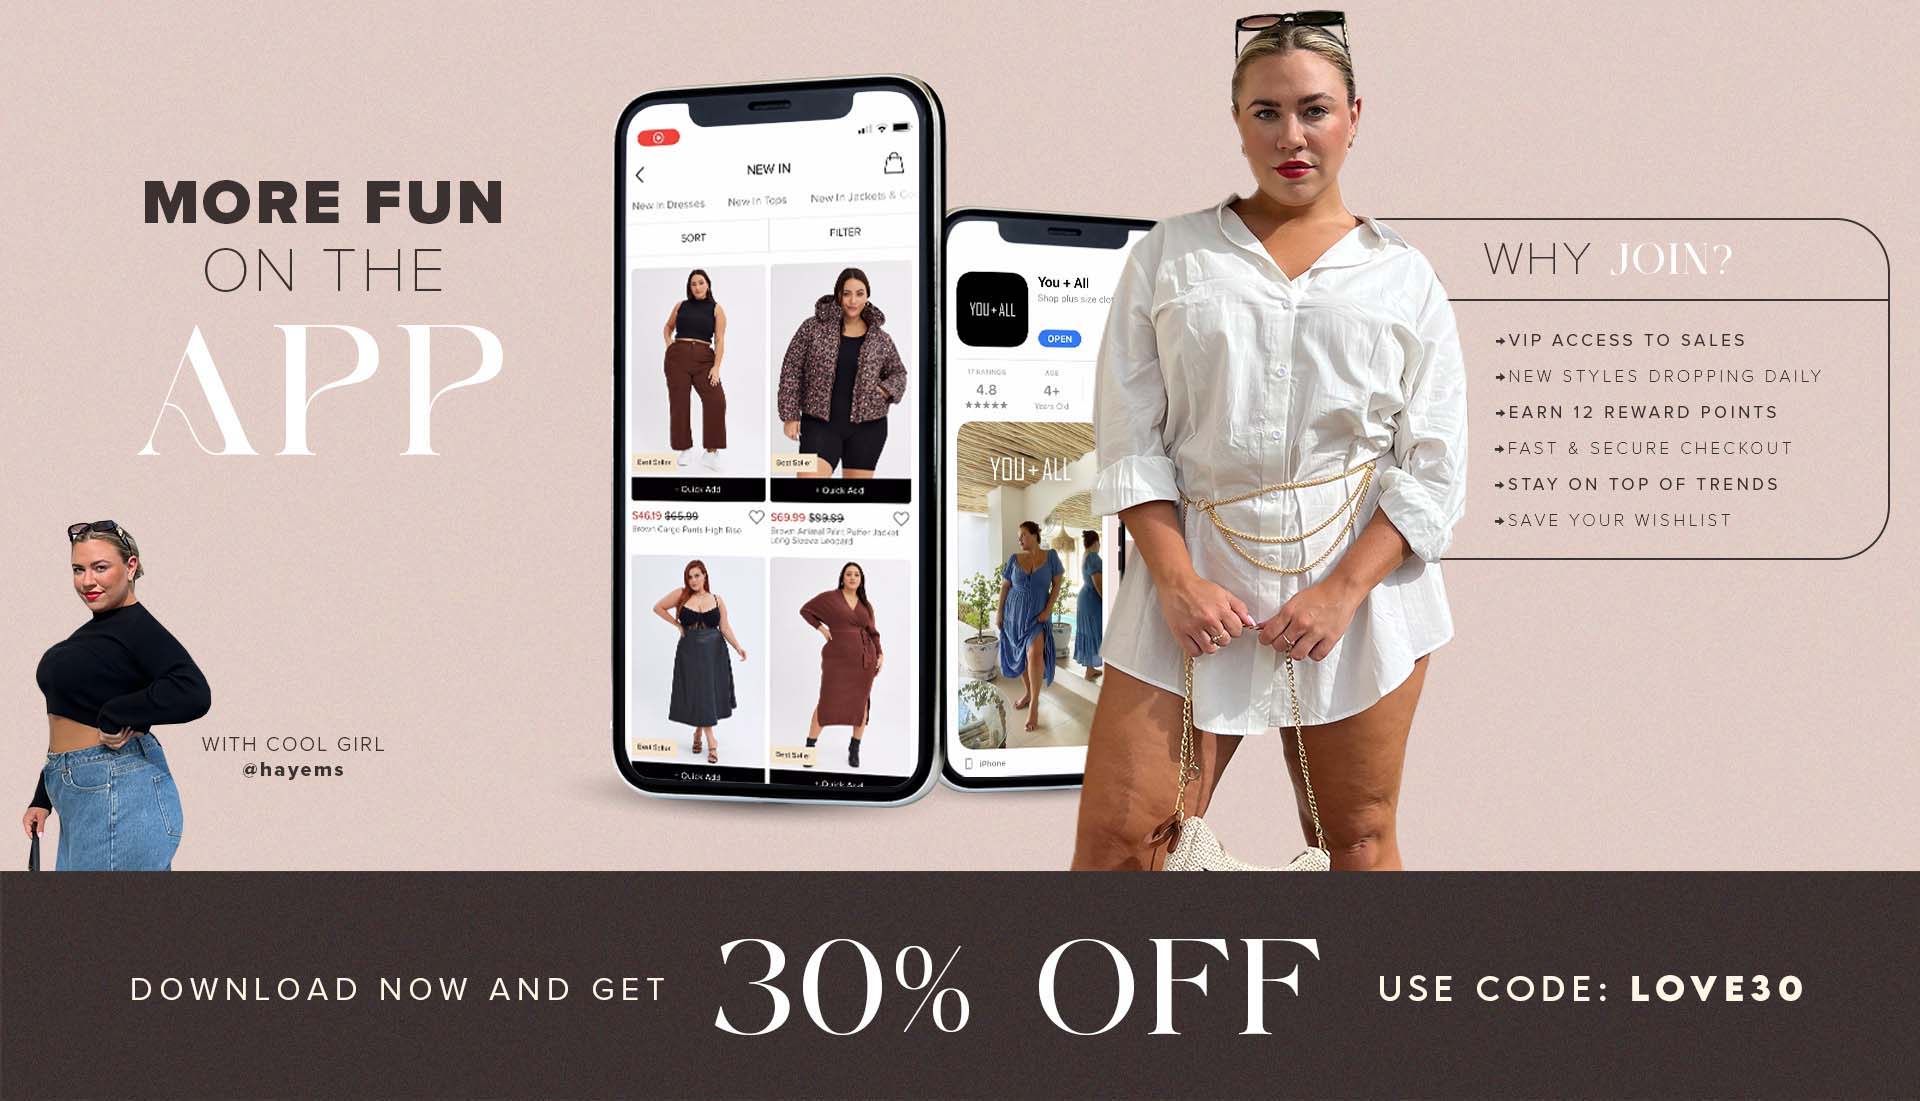 More Fun on the App, Get exclusive offer at You and All Curvy Plus Size App 